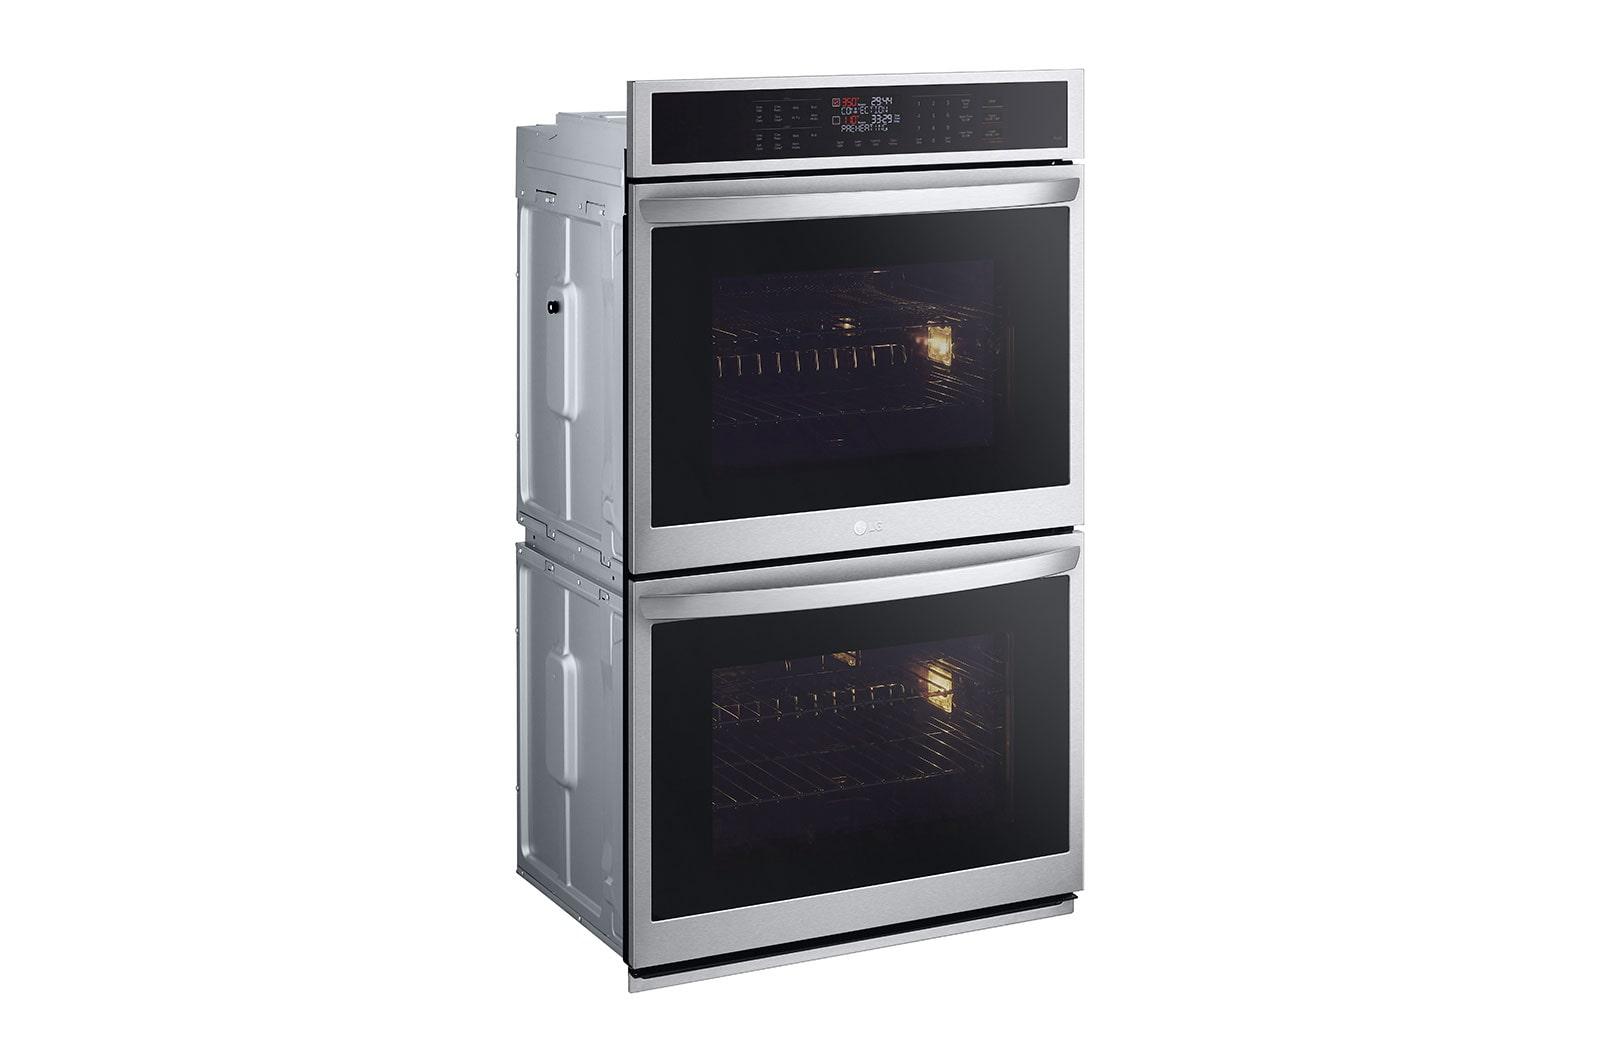 Lg 9.4 cu. ft. Smart Double Wall Oven with Convection and Air Fry